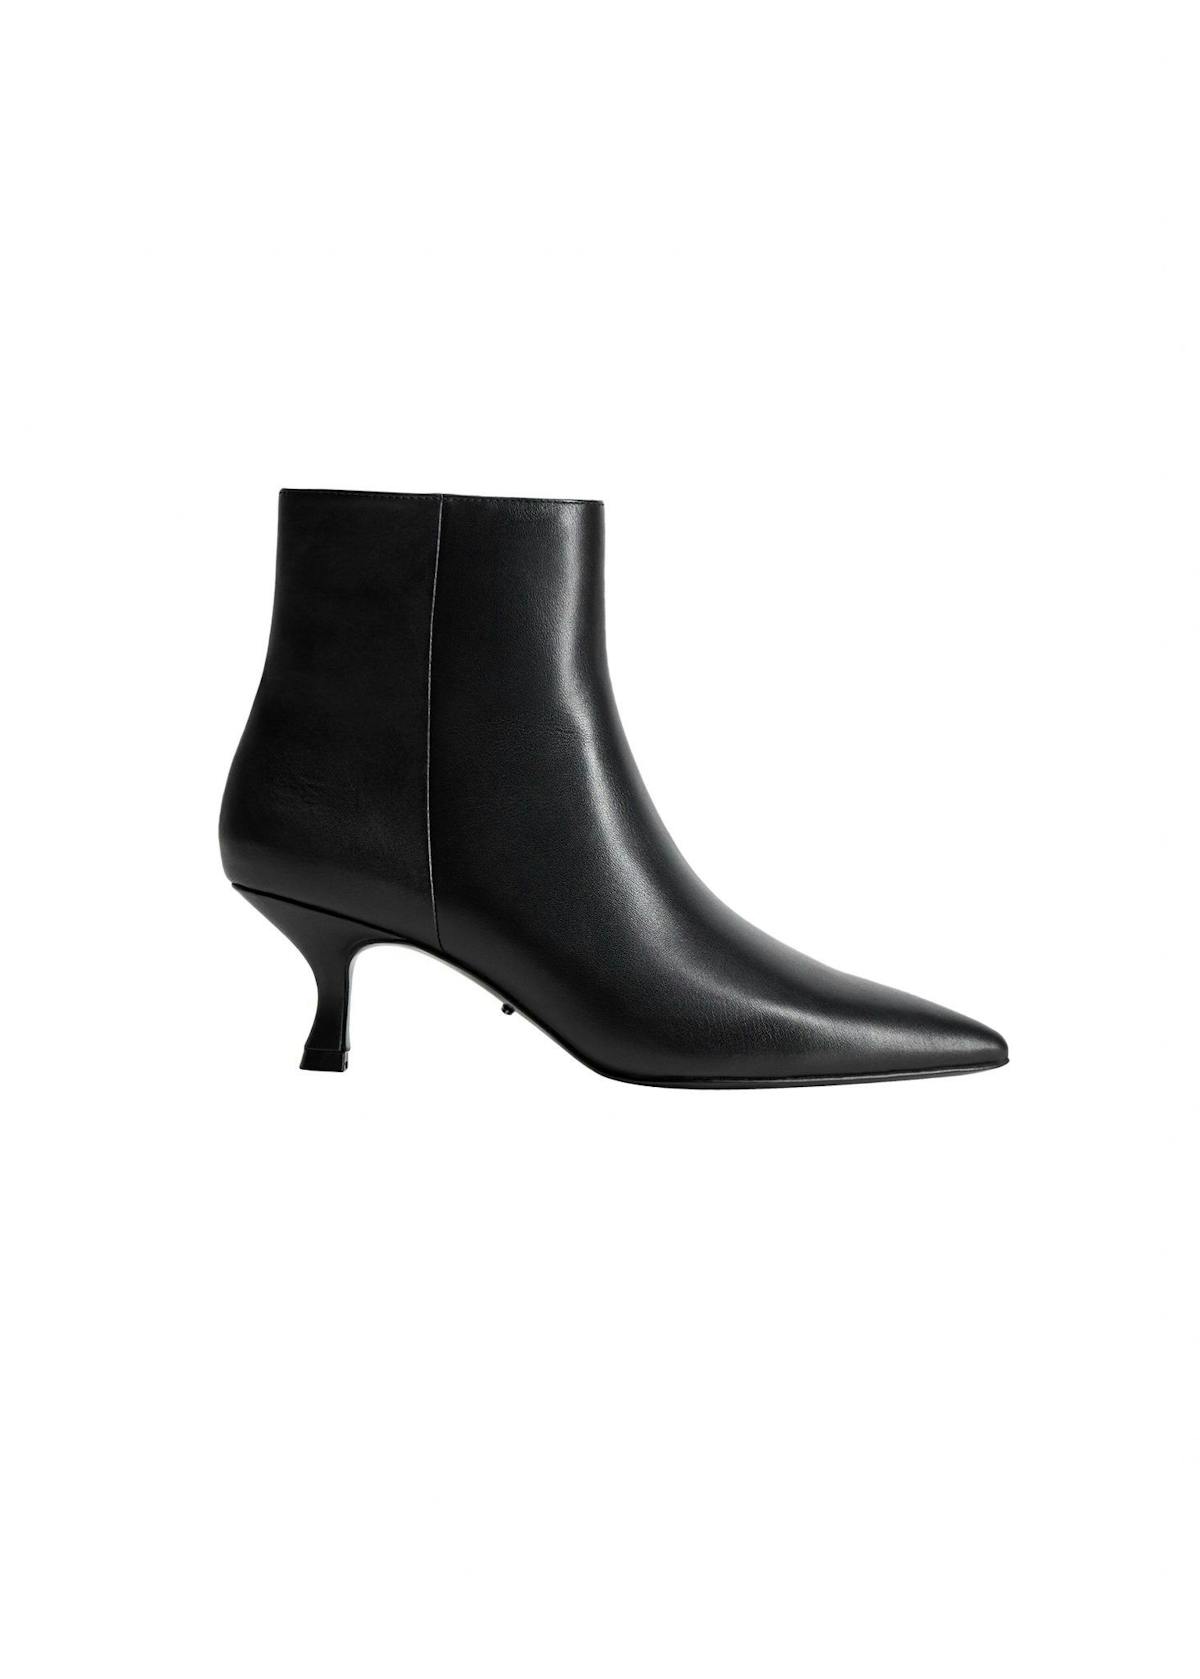 Best black ankle boots